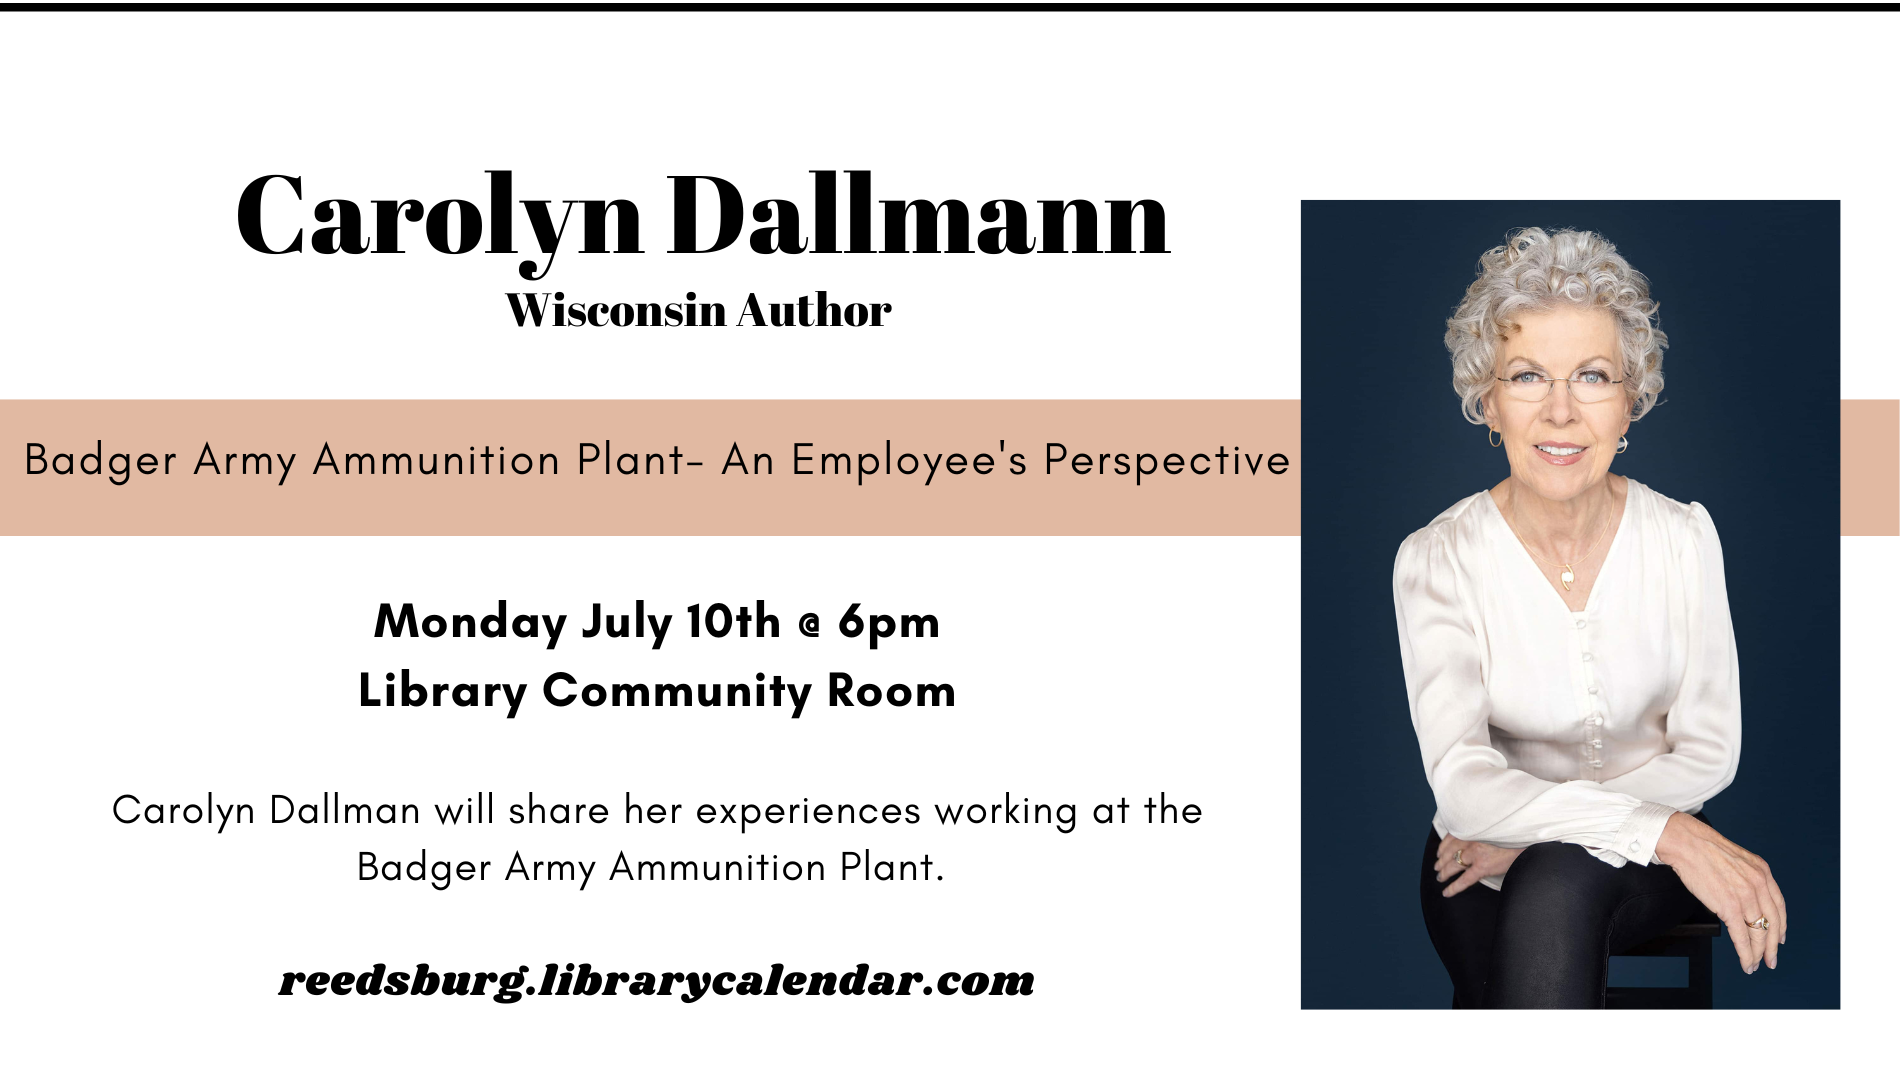 Carolyn Dallmann presents: The Badger Army Ammunition Plant: An Employee's Perspective on July 10th at 6pm.